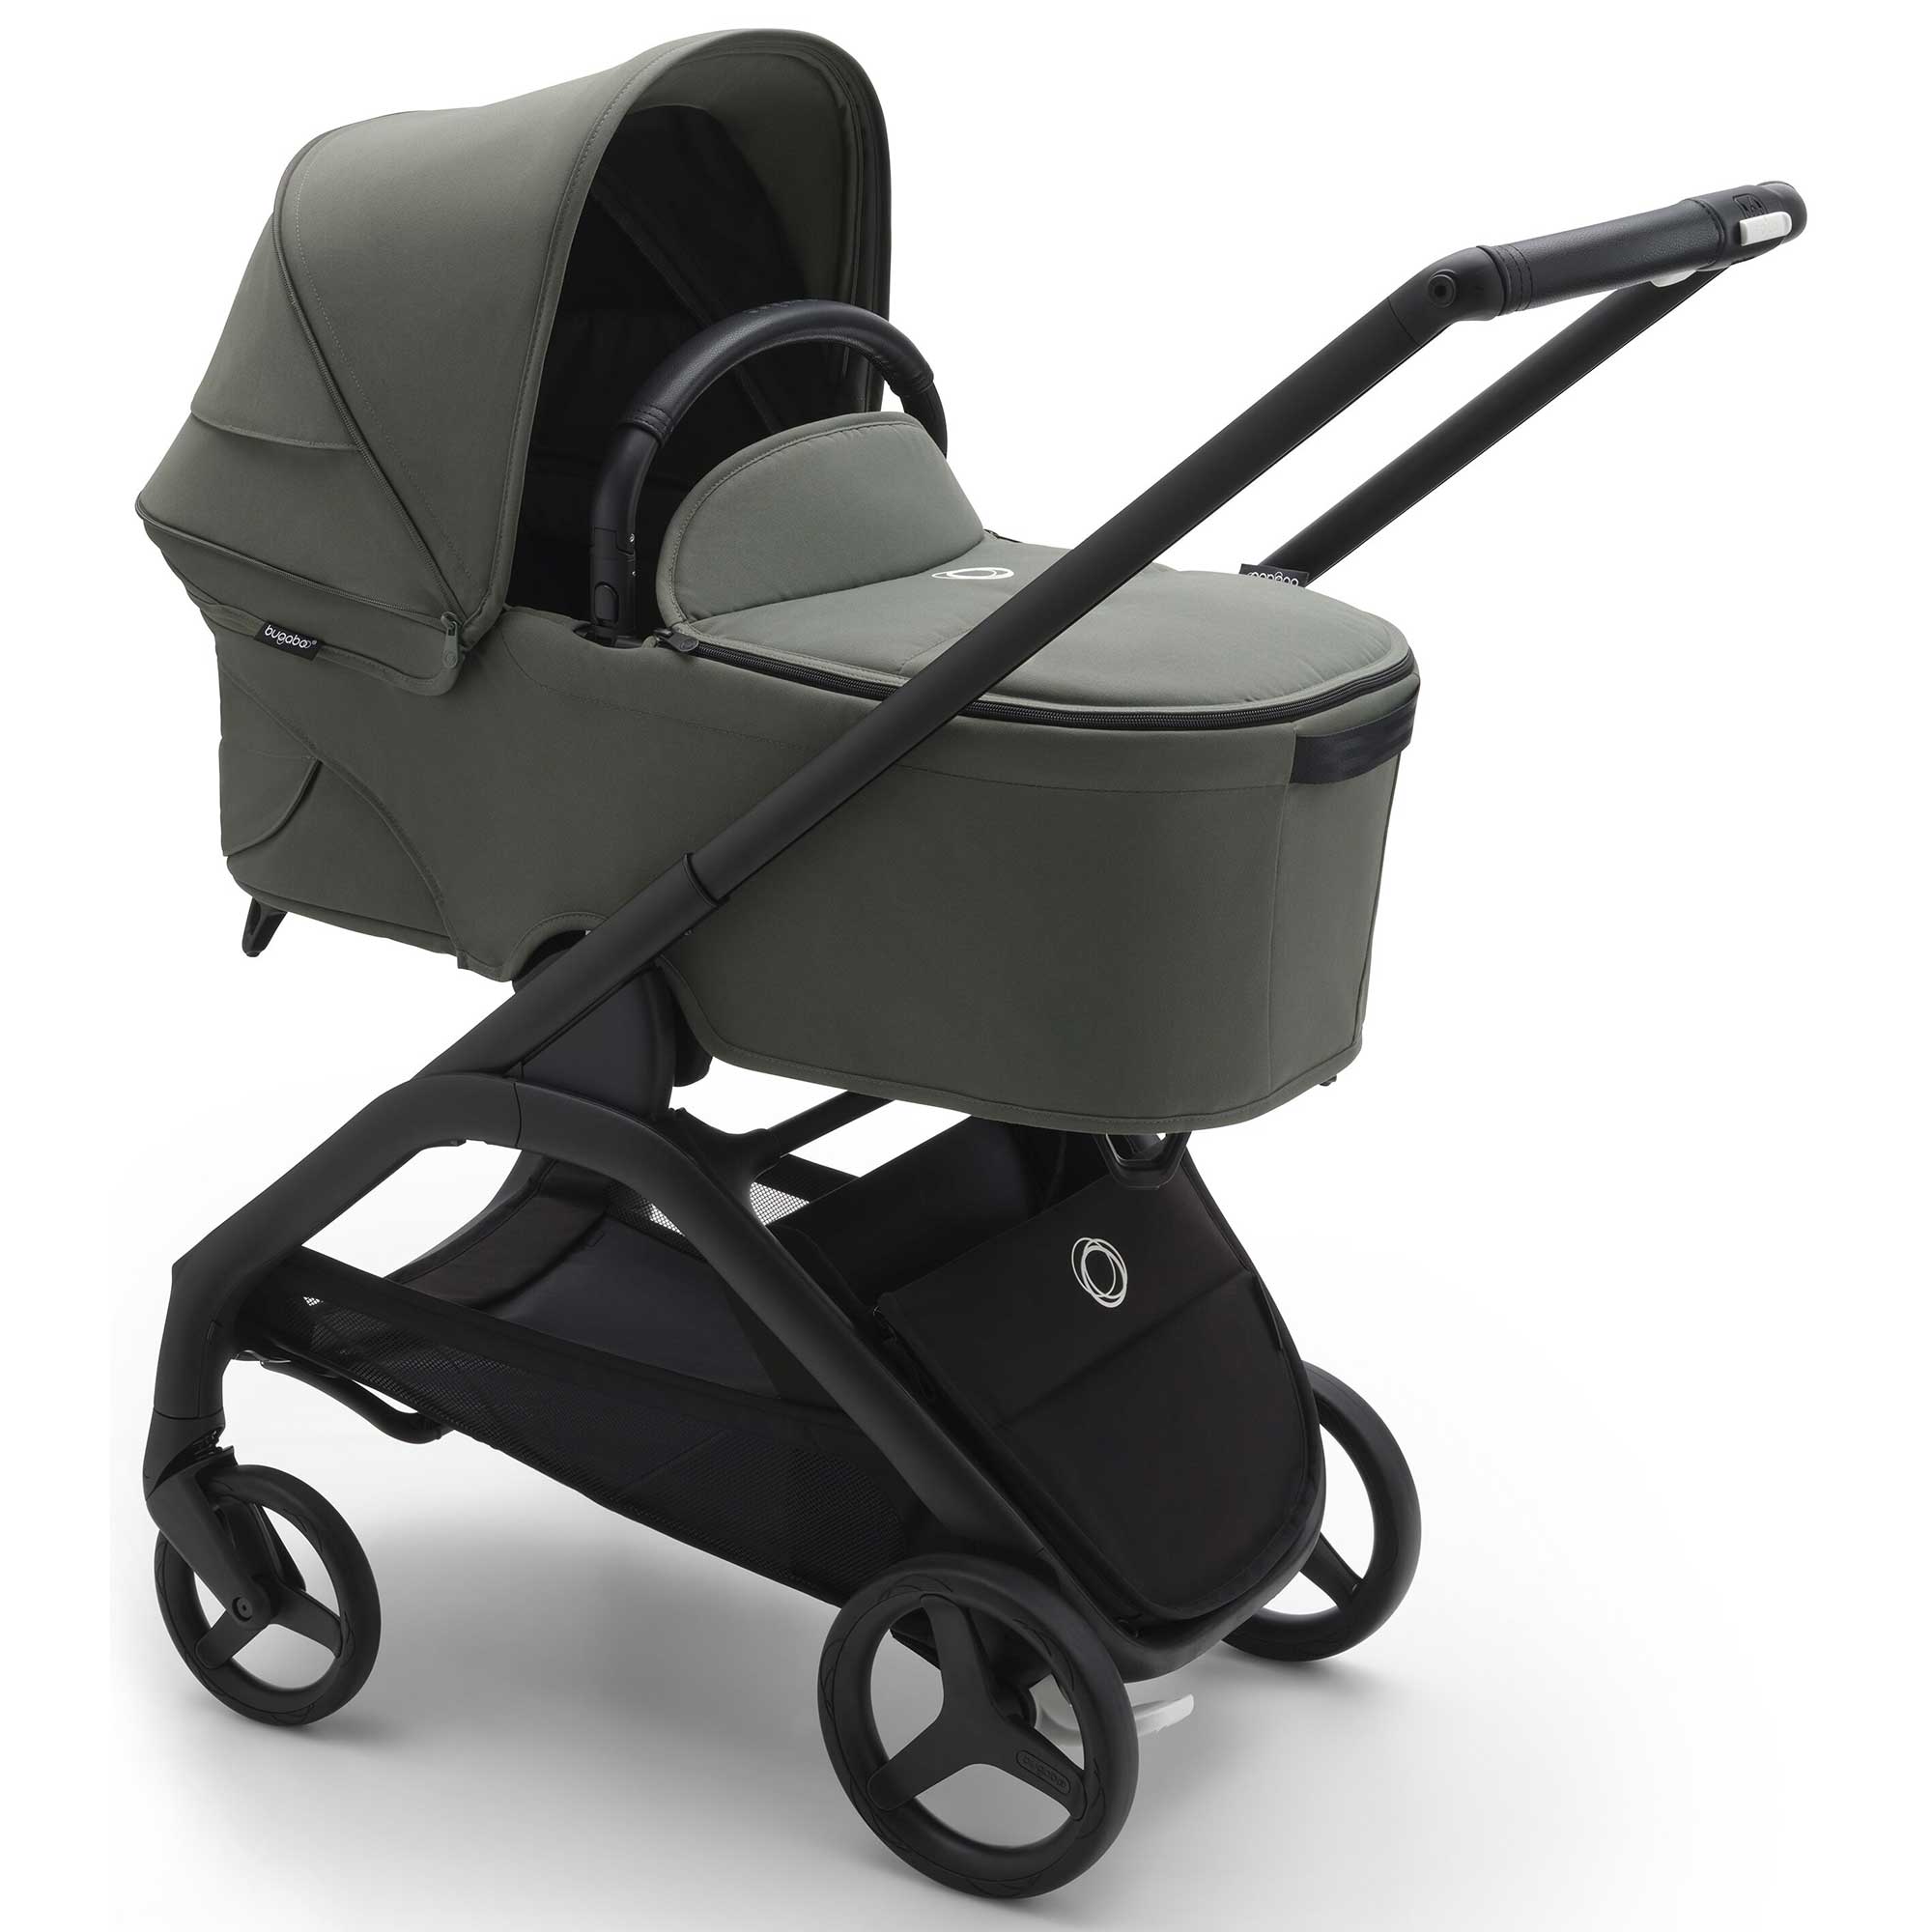 Bugaboo Travel Systems Bugaboo Dragonfly Ultimate Bundle in Black/Forest Green 13810-BLK-FOR-GRN